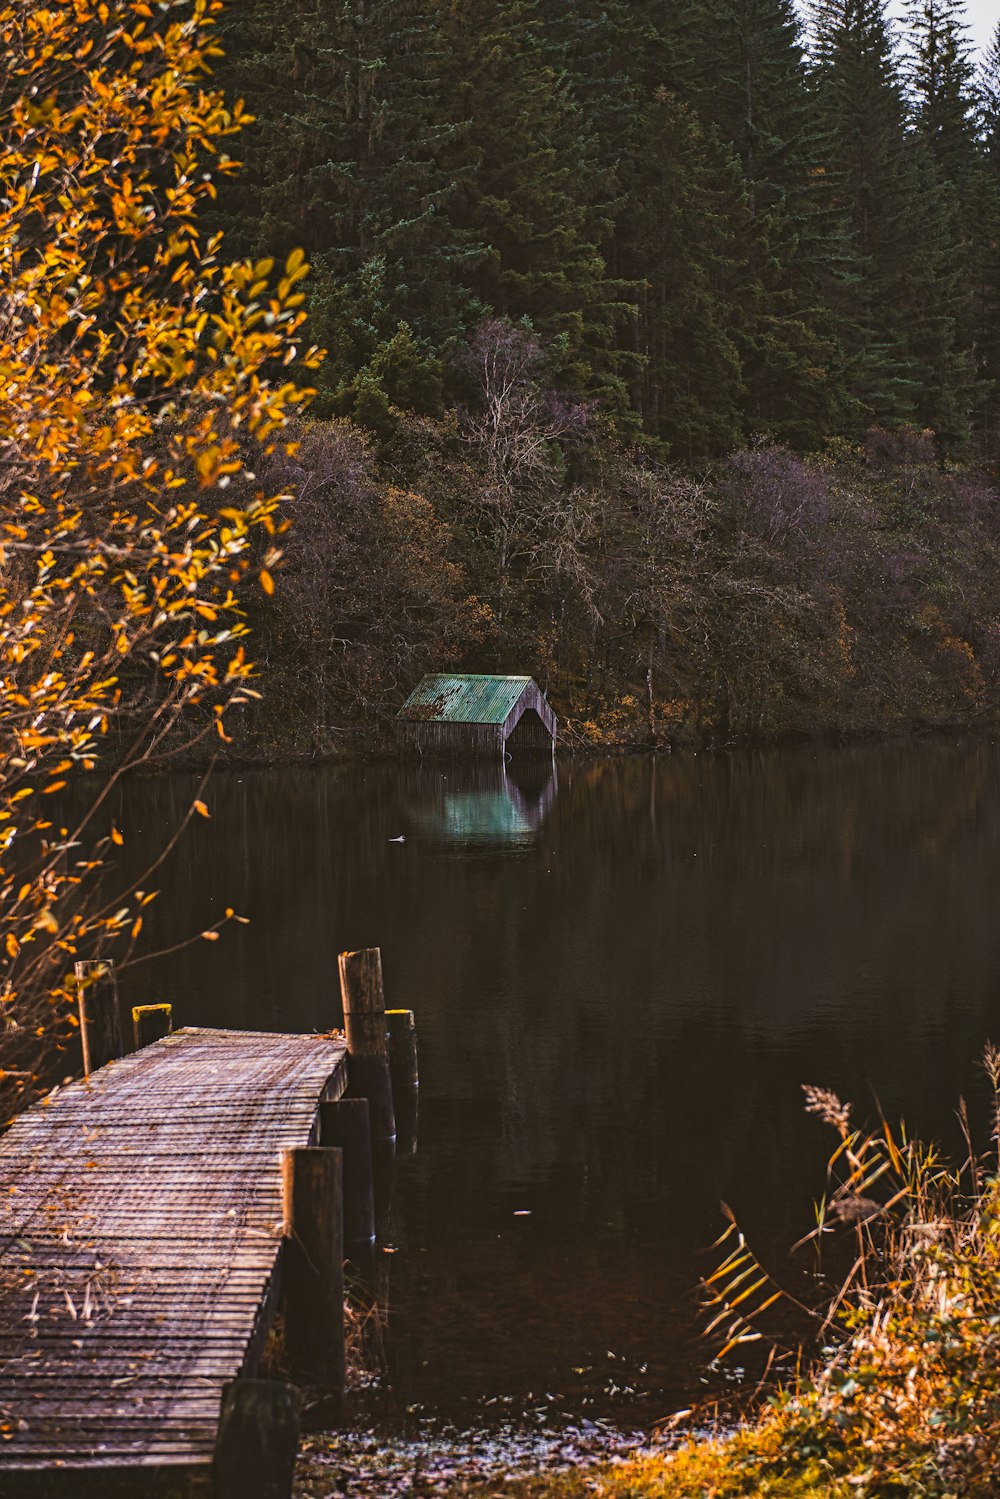 a wooden dock sitting on top of a lake next to a forest